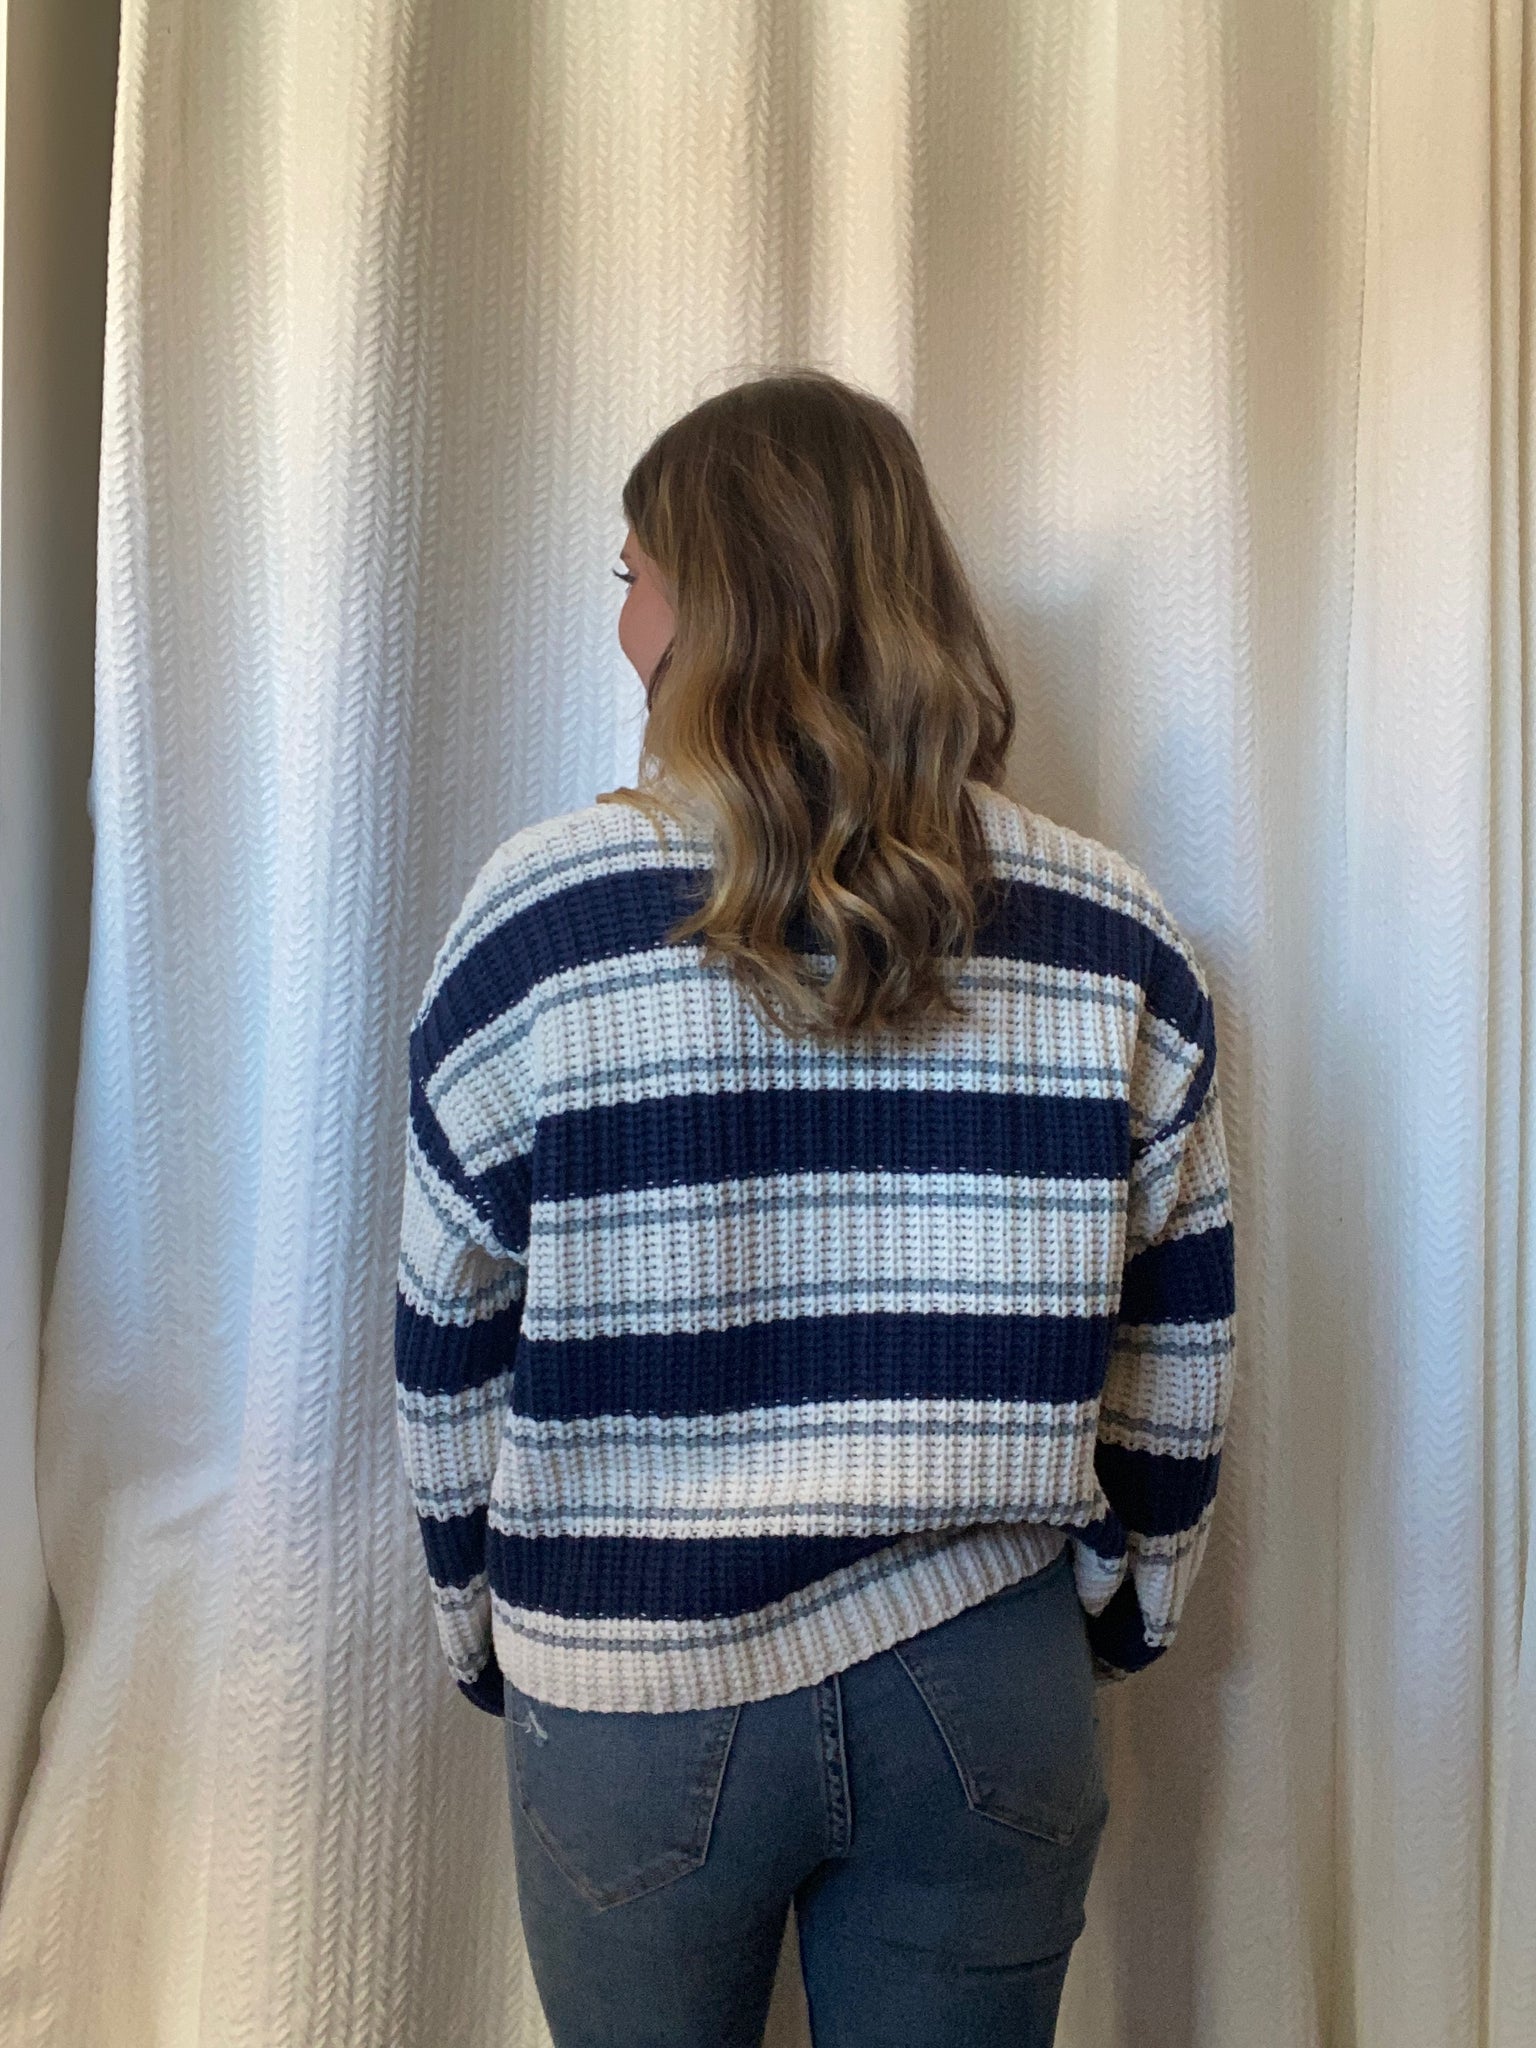 Show your Stripes Sweater